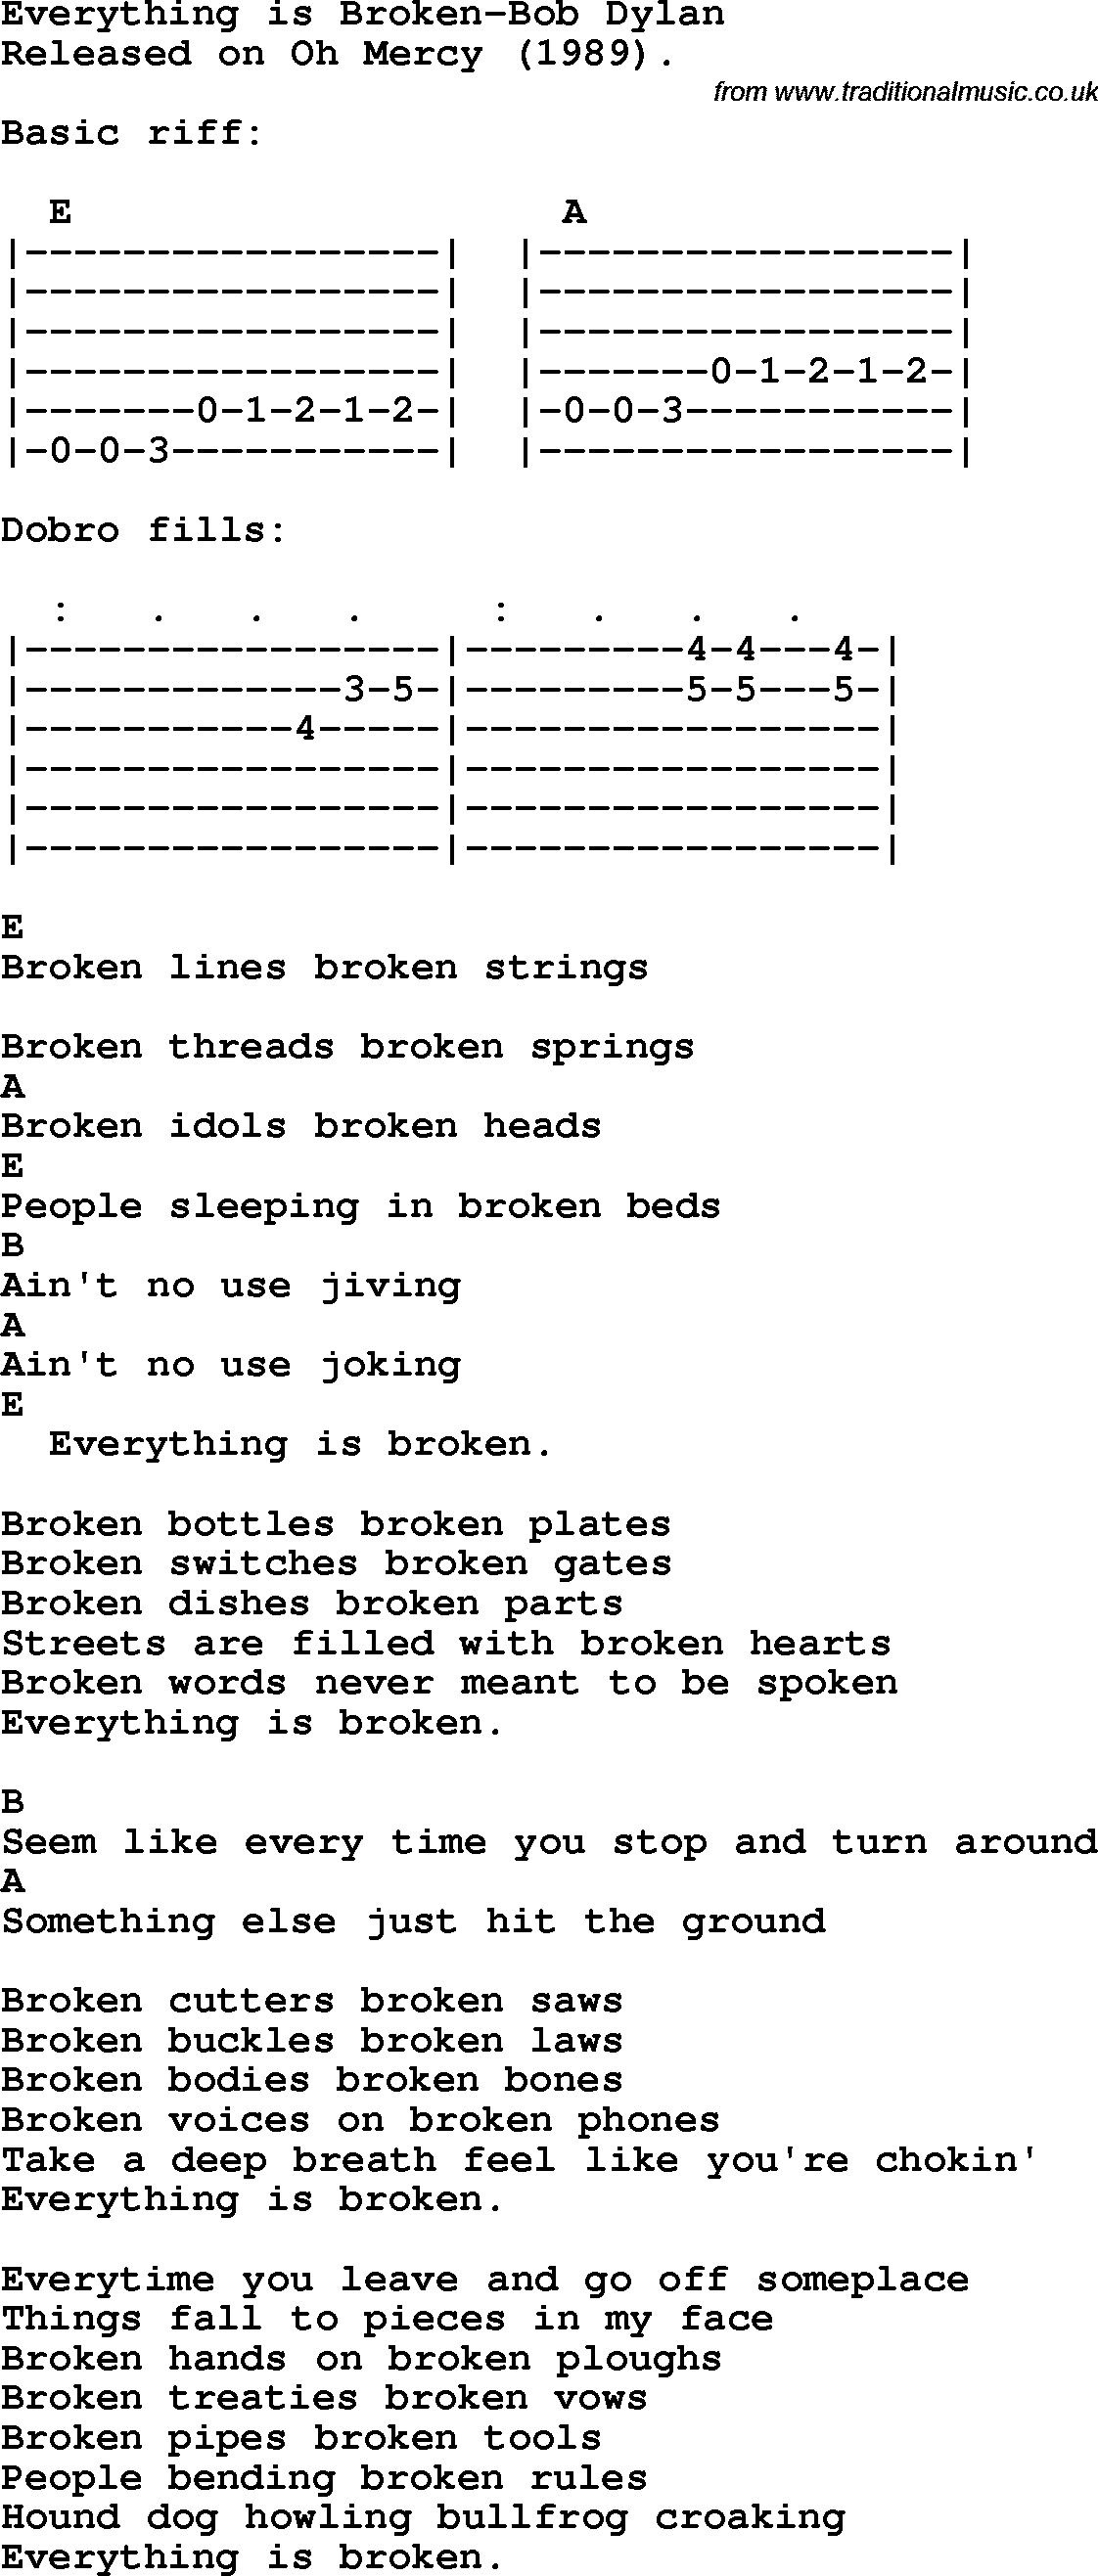 Protest Song Everything Is Broken-Bob Dylan lyrics and chords